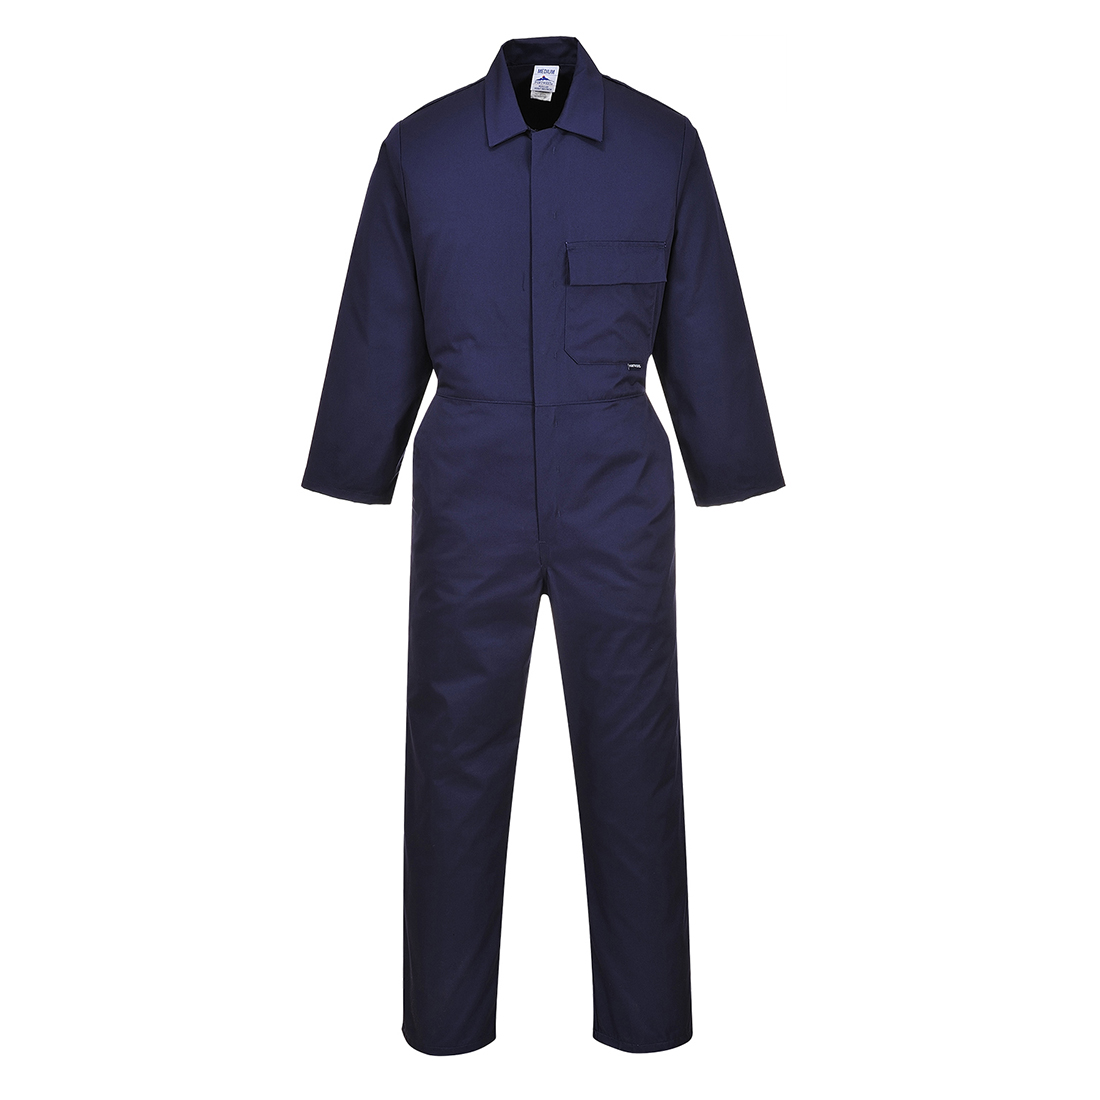 2802 - Standard Coverall Navy